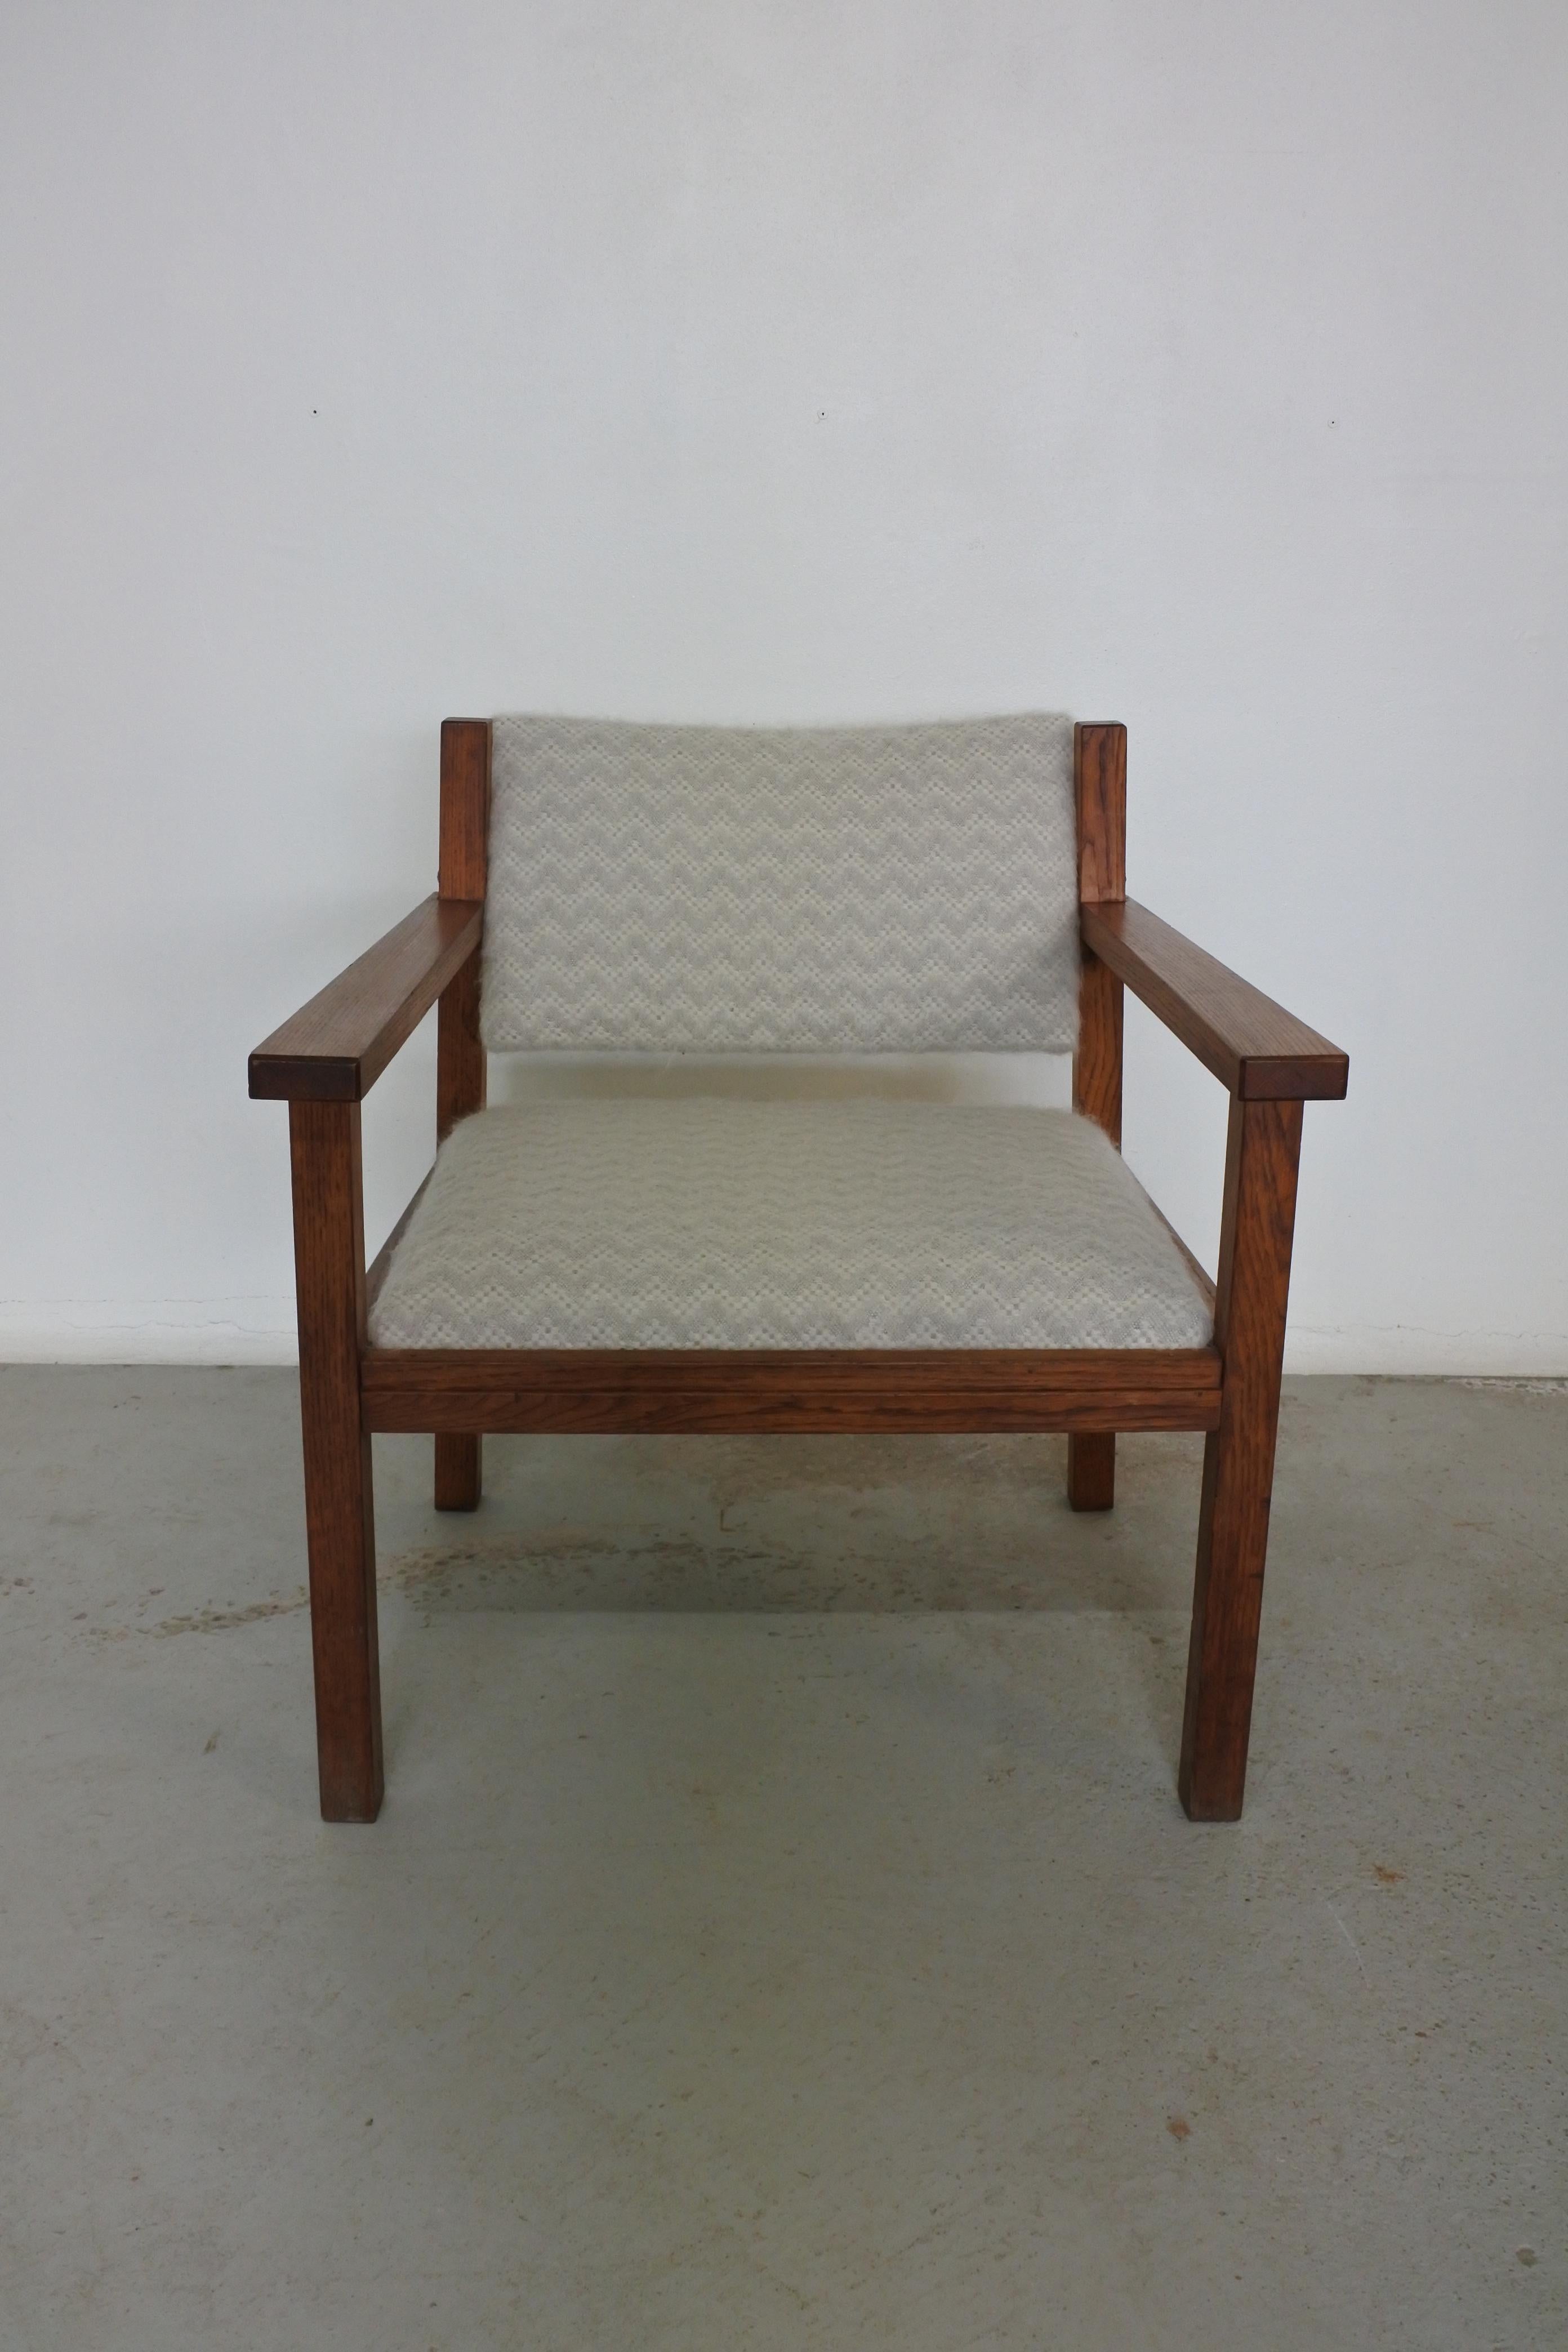 Modernist armchair in solid oak and upholstery.
Made in France in the 1940s.
Swivel/tilt back.
In the style of Elizabeth Eyre de Lanux

Newly reupholstered with a 